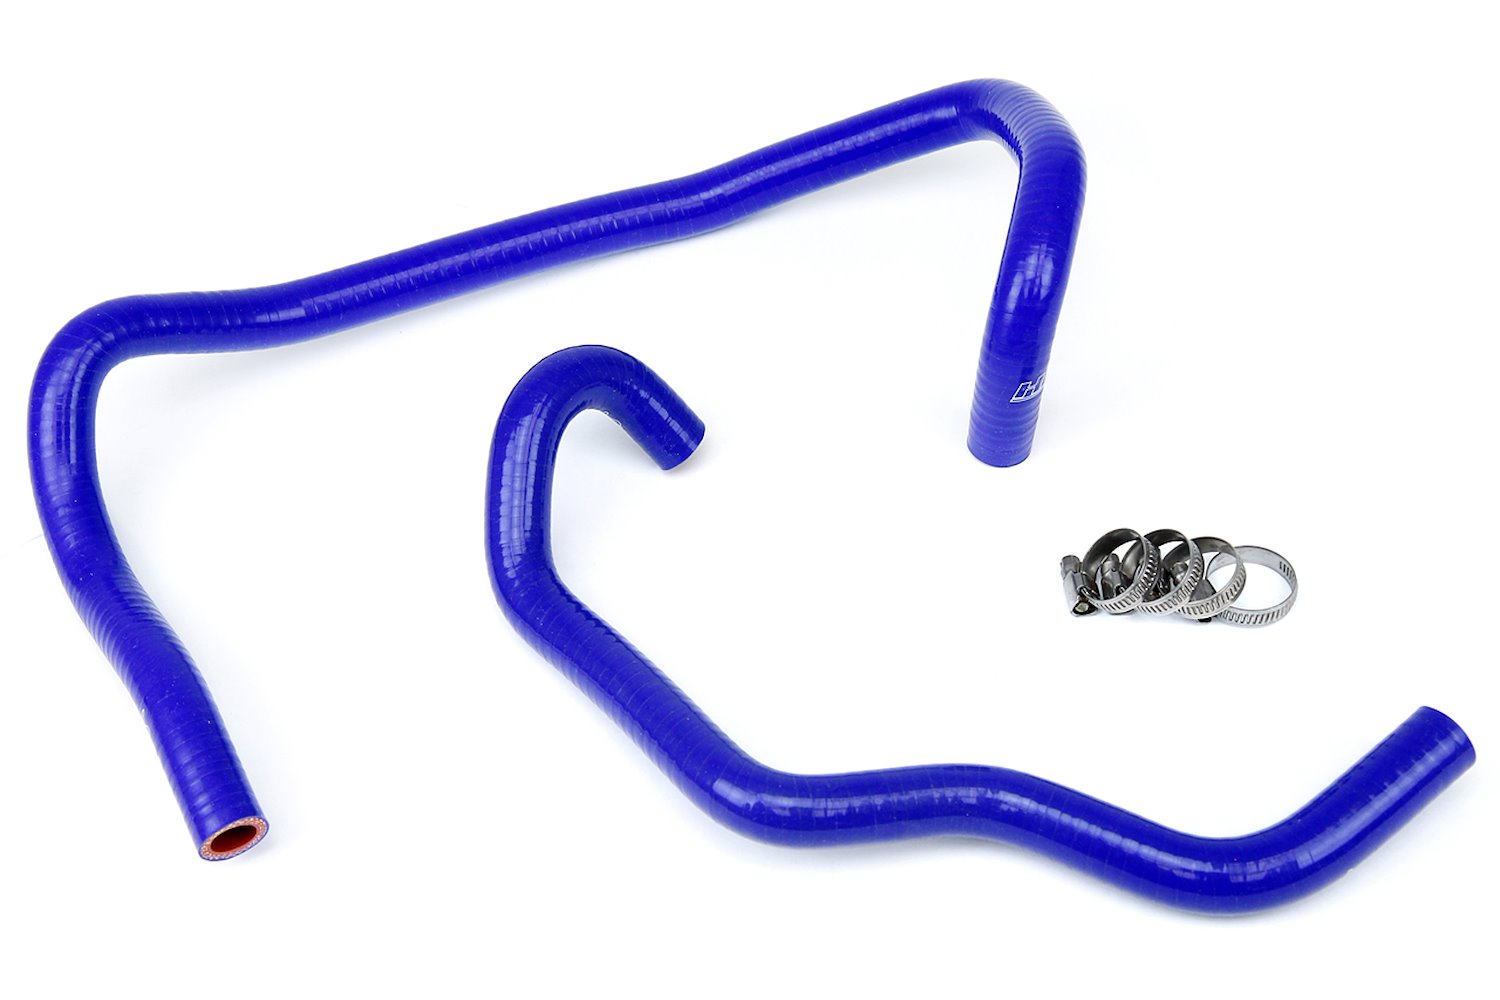 57-1469-BLUE Heater Hose Kit, High-Temp 3-Ply Reinforced Silicone, Replace OEM Rubber Heater Coolant Hoses